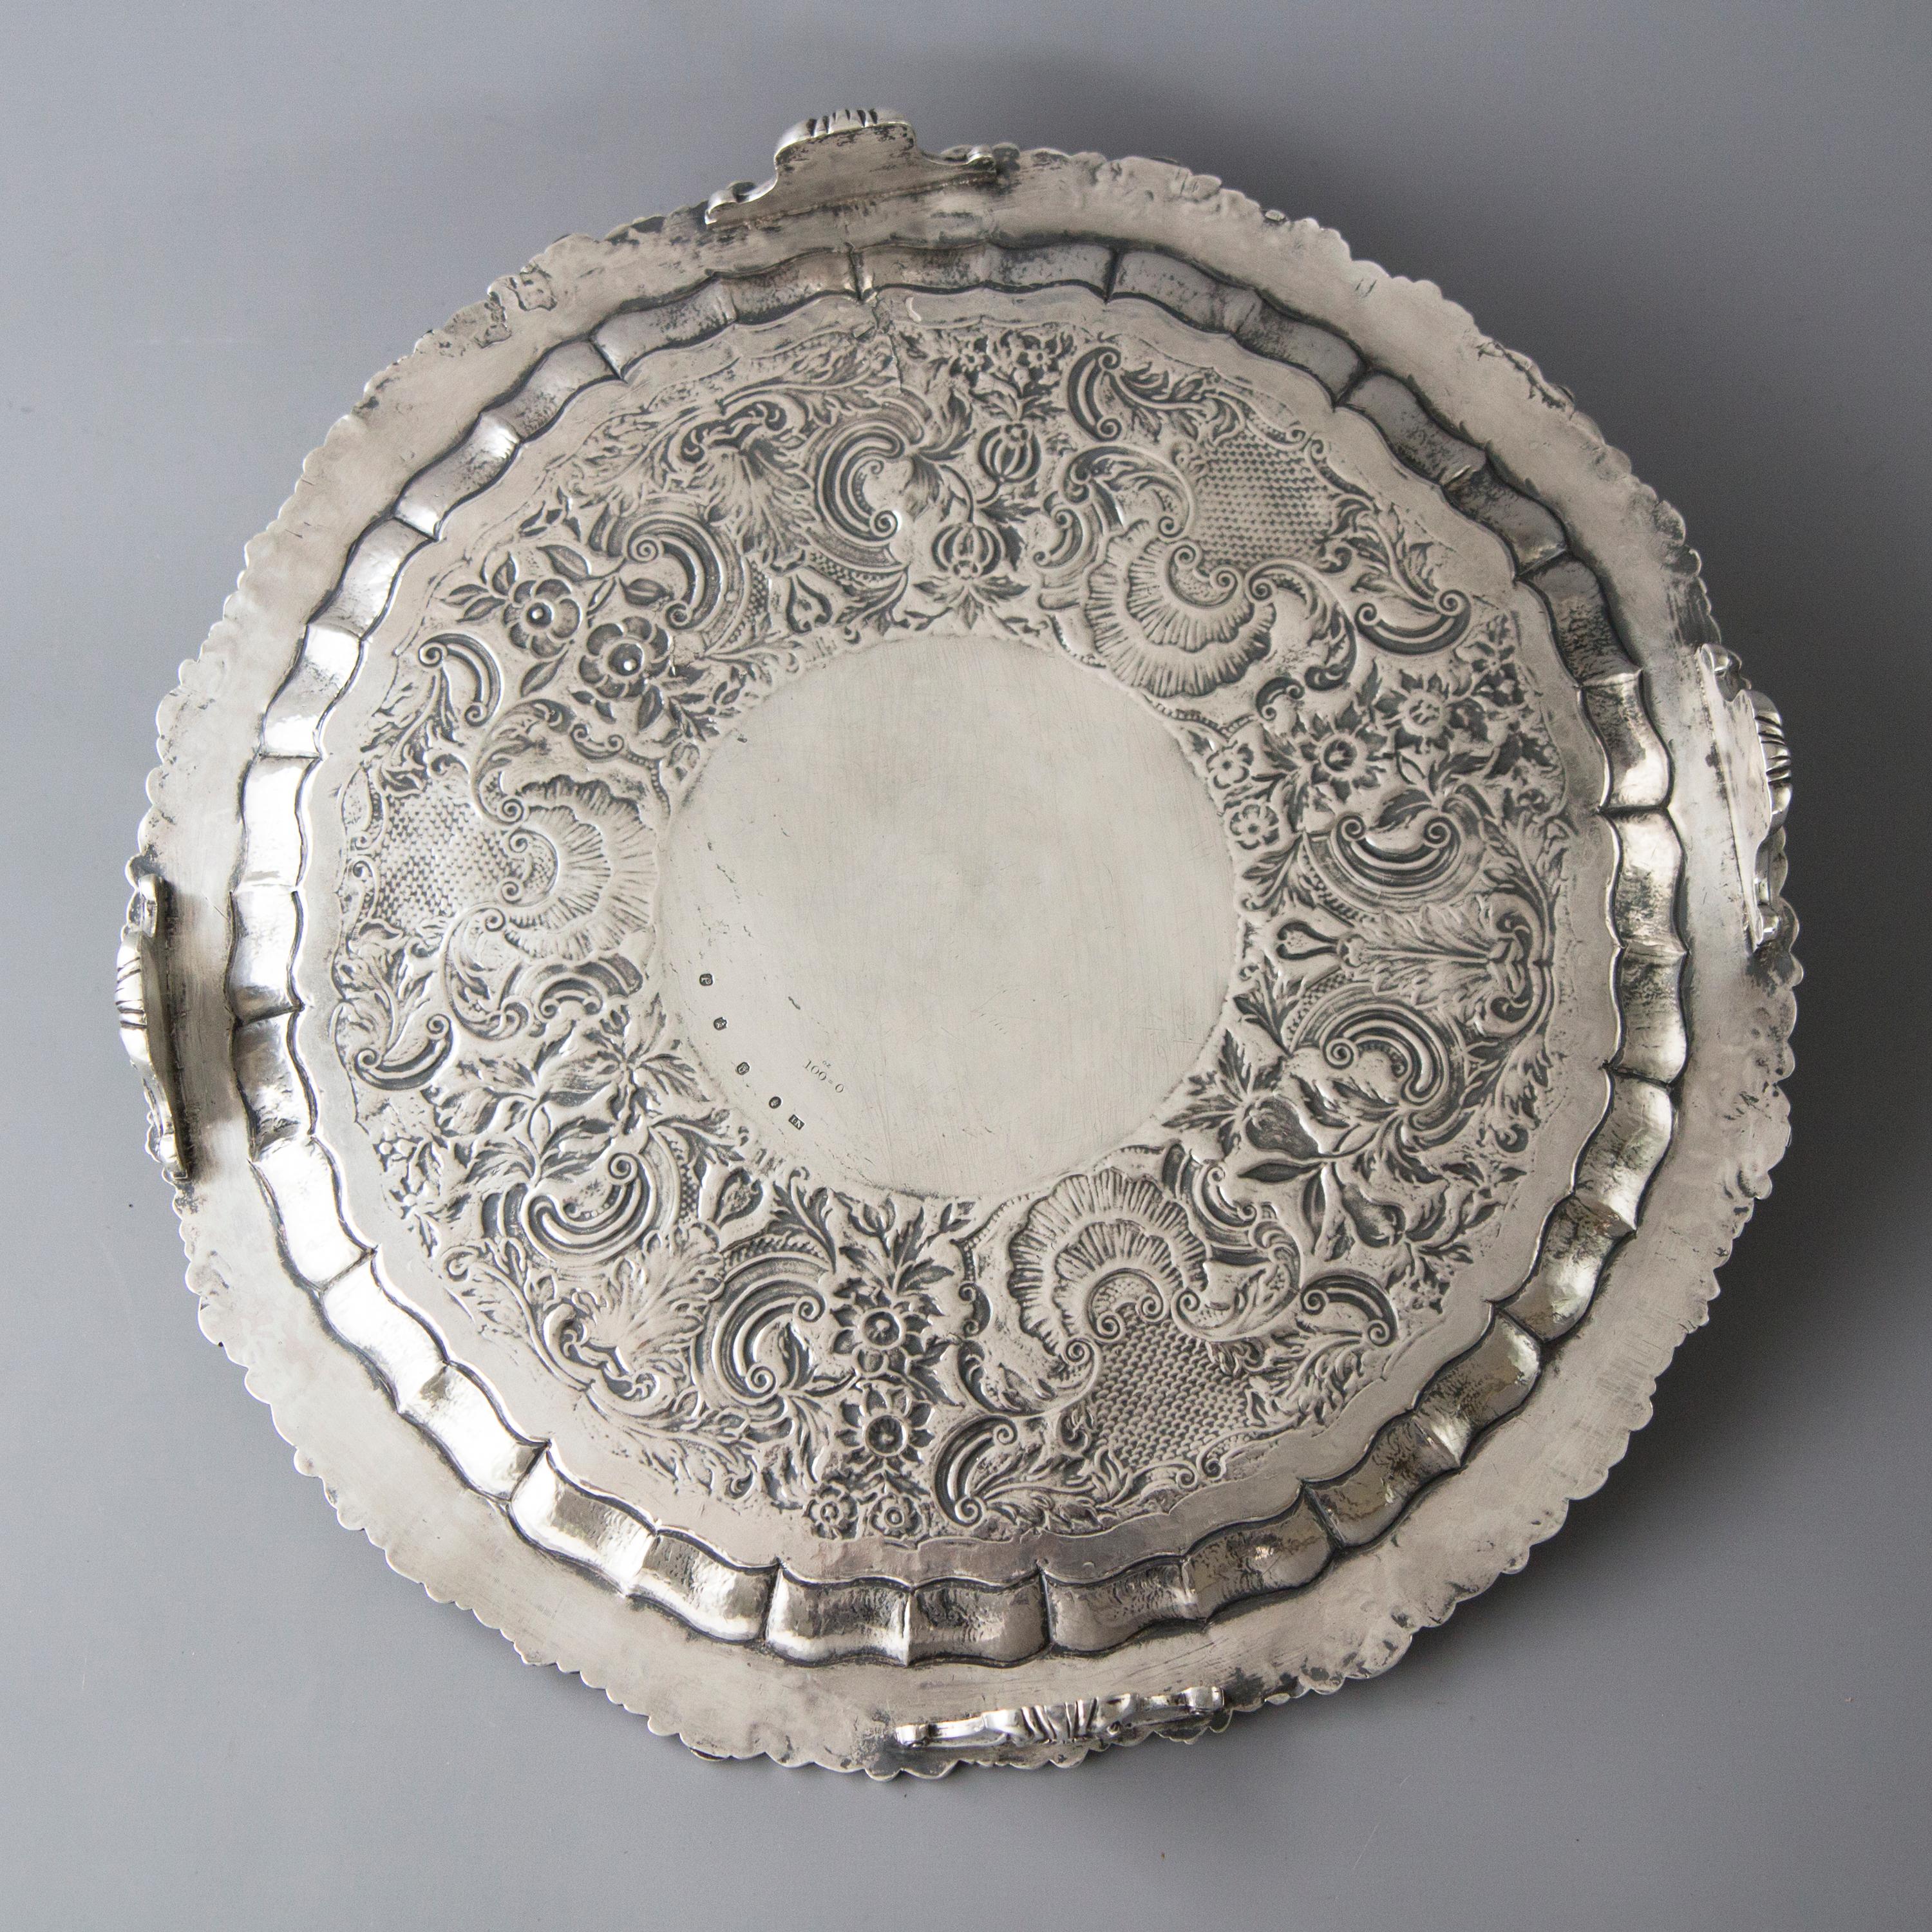 A very large circular salver with cast and applied rim of floral and foliate design. The central plate embossed with floral, foliate and shell form arabesques. In the centre is a dedication inscription to Canon Fleming from a member of his